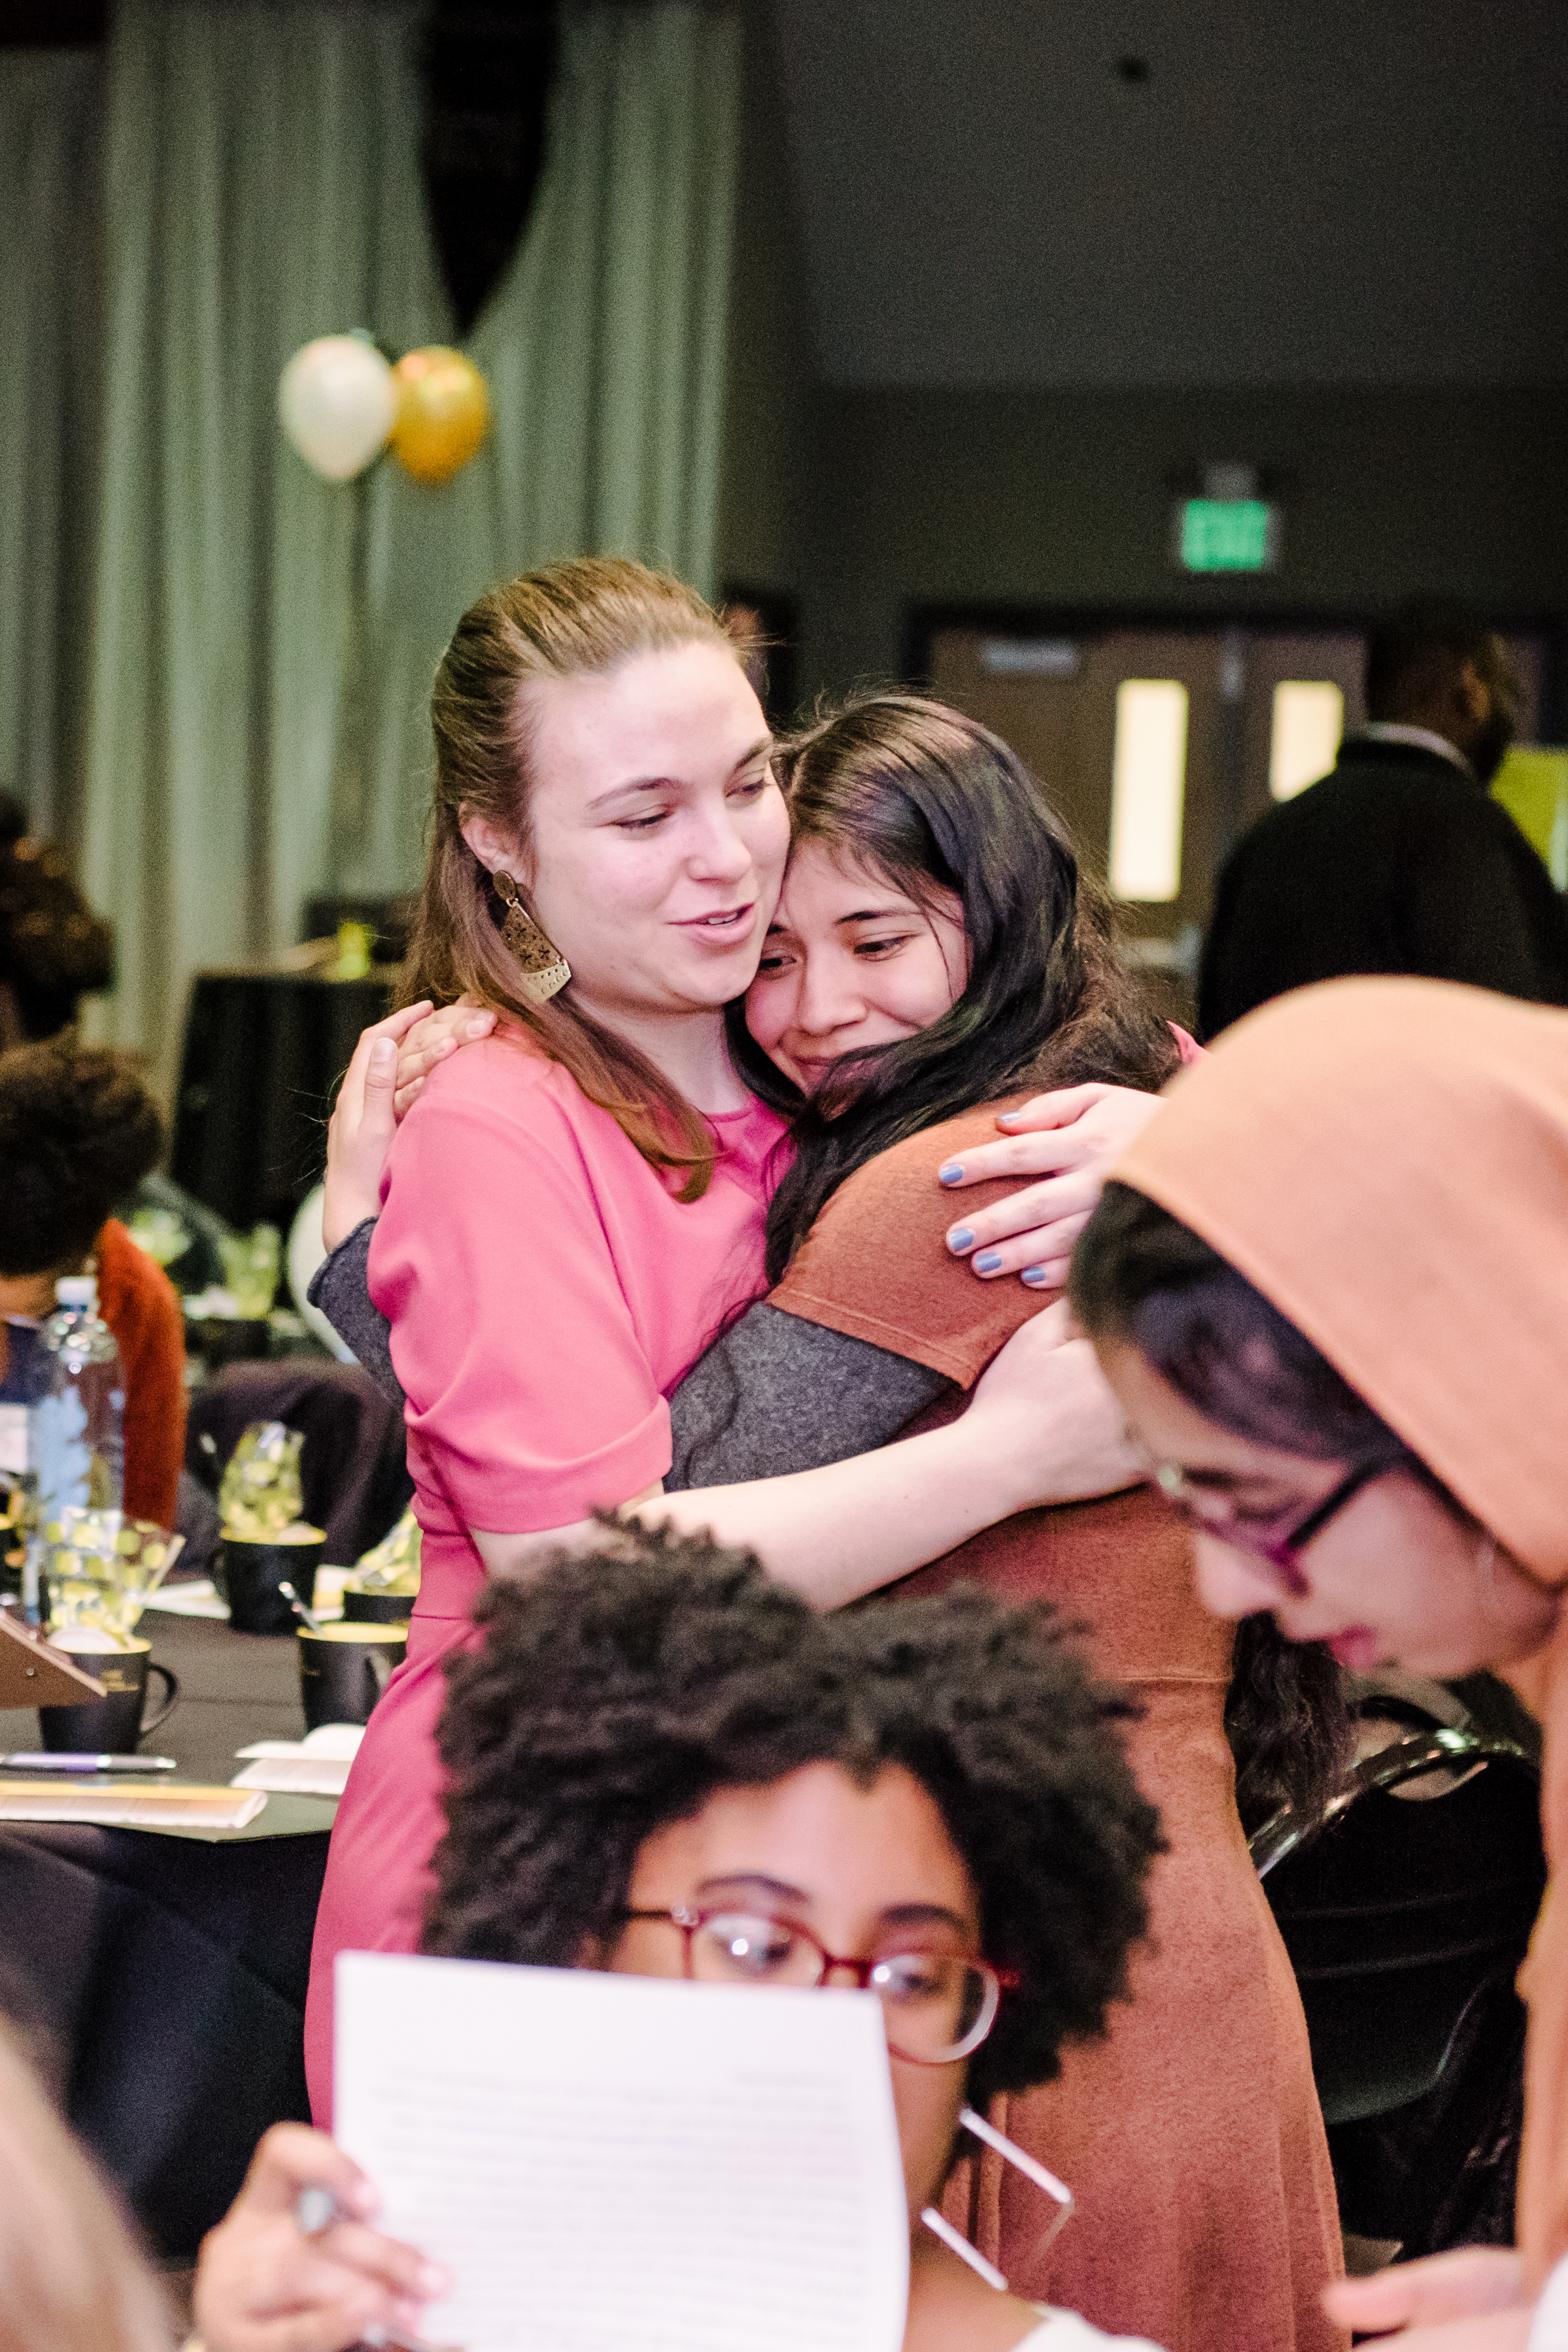 Students gather to celebrate The Mosaic's 15th anniversary in February 2019.